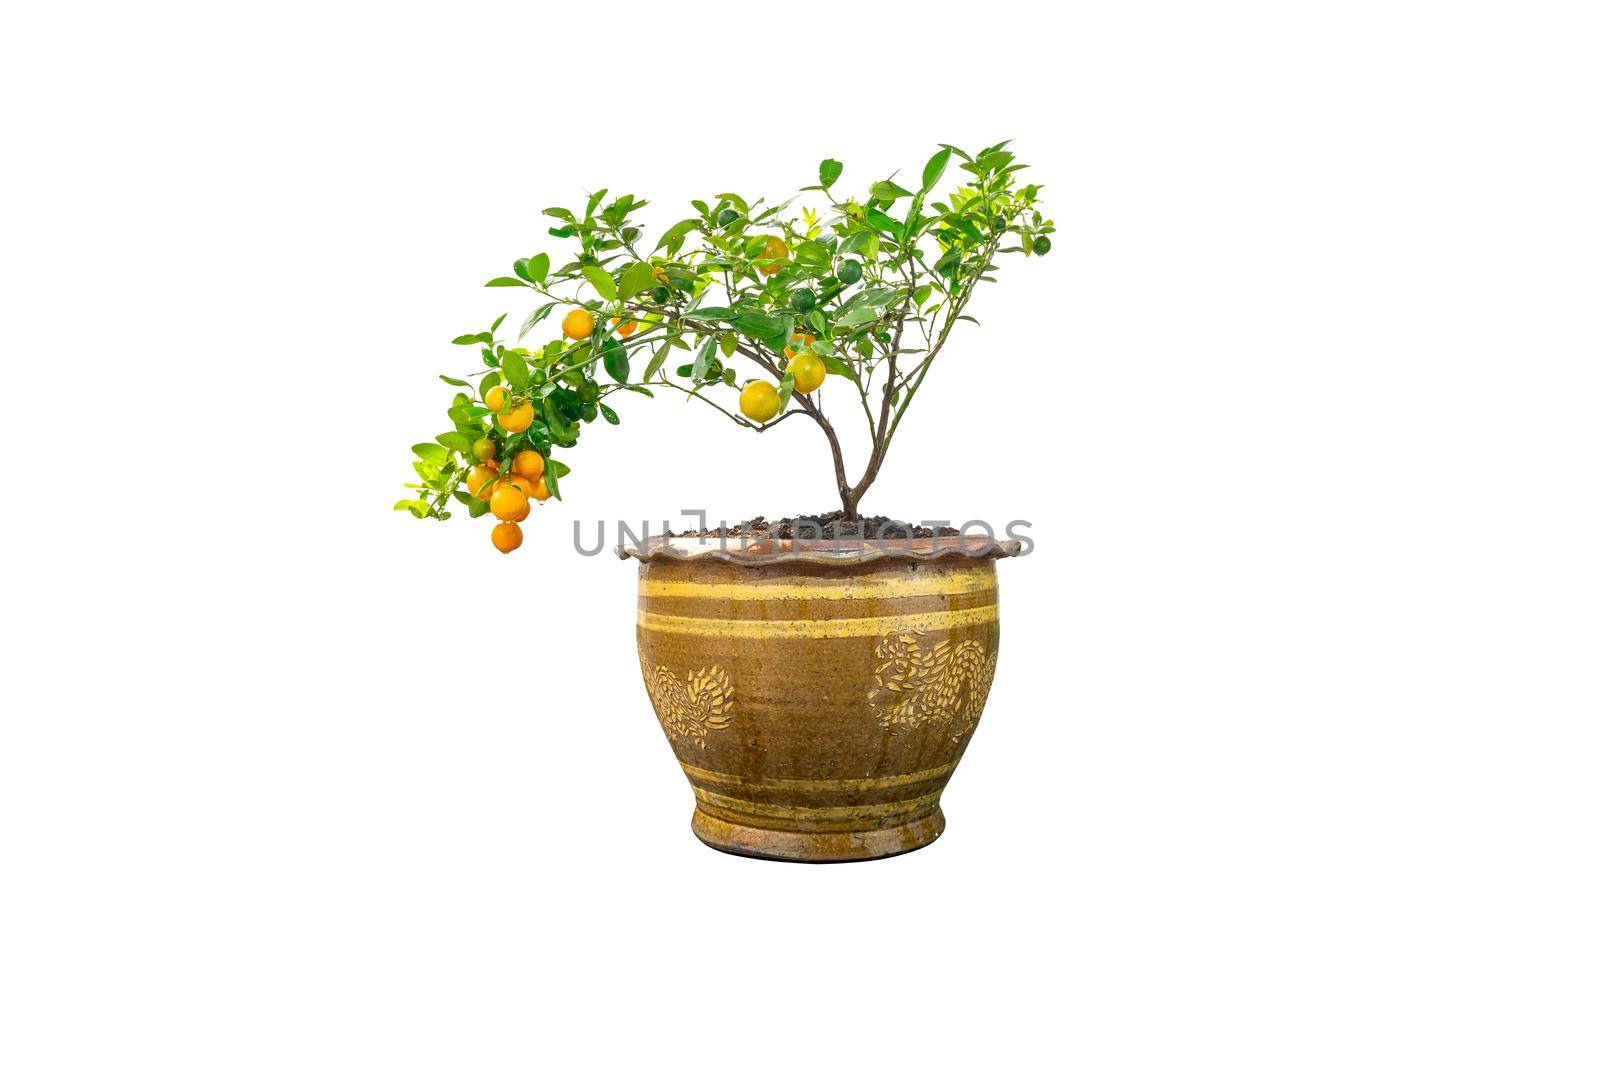 Kumquat tree is a fruit that looks like an oranges but smaller in size in a pot, isolated on white background.